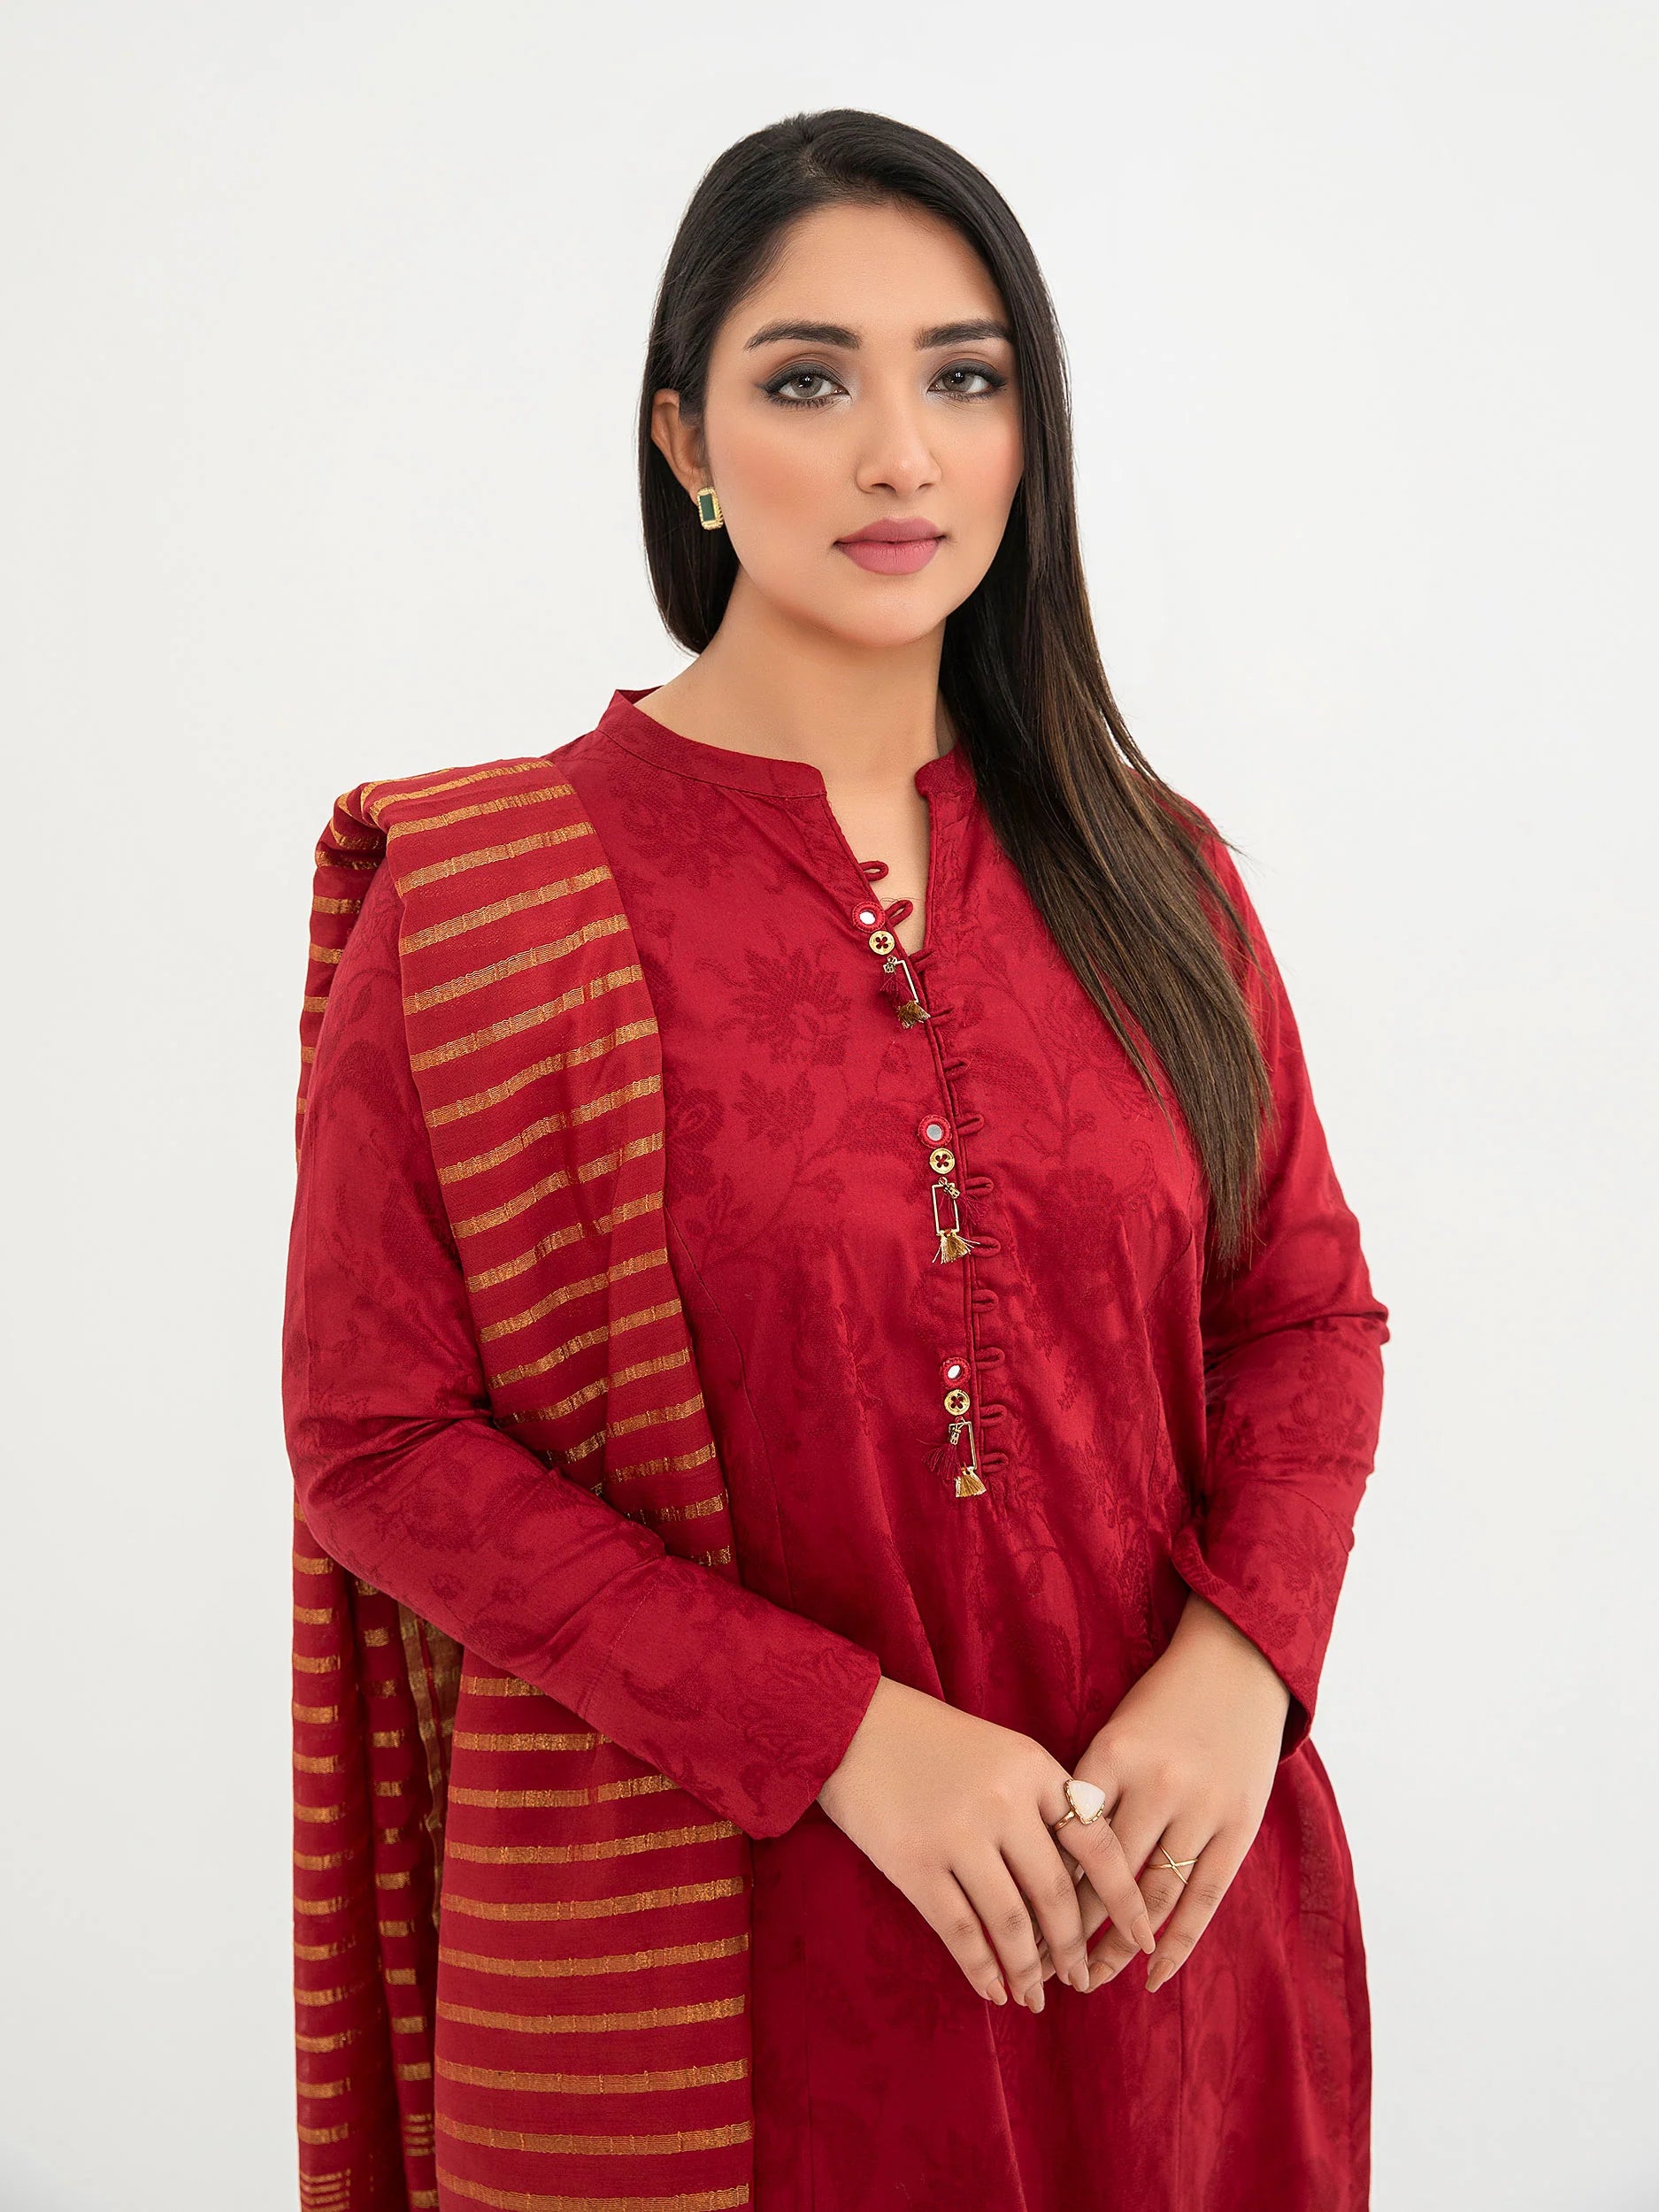 Limelight Red Jacquard Embroidered 3-Piece Suit (P8484SU)